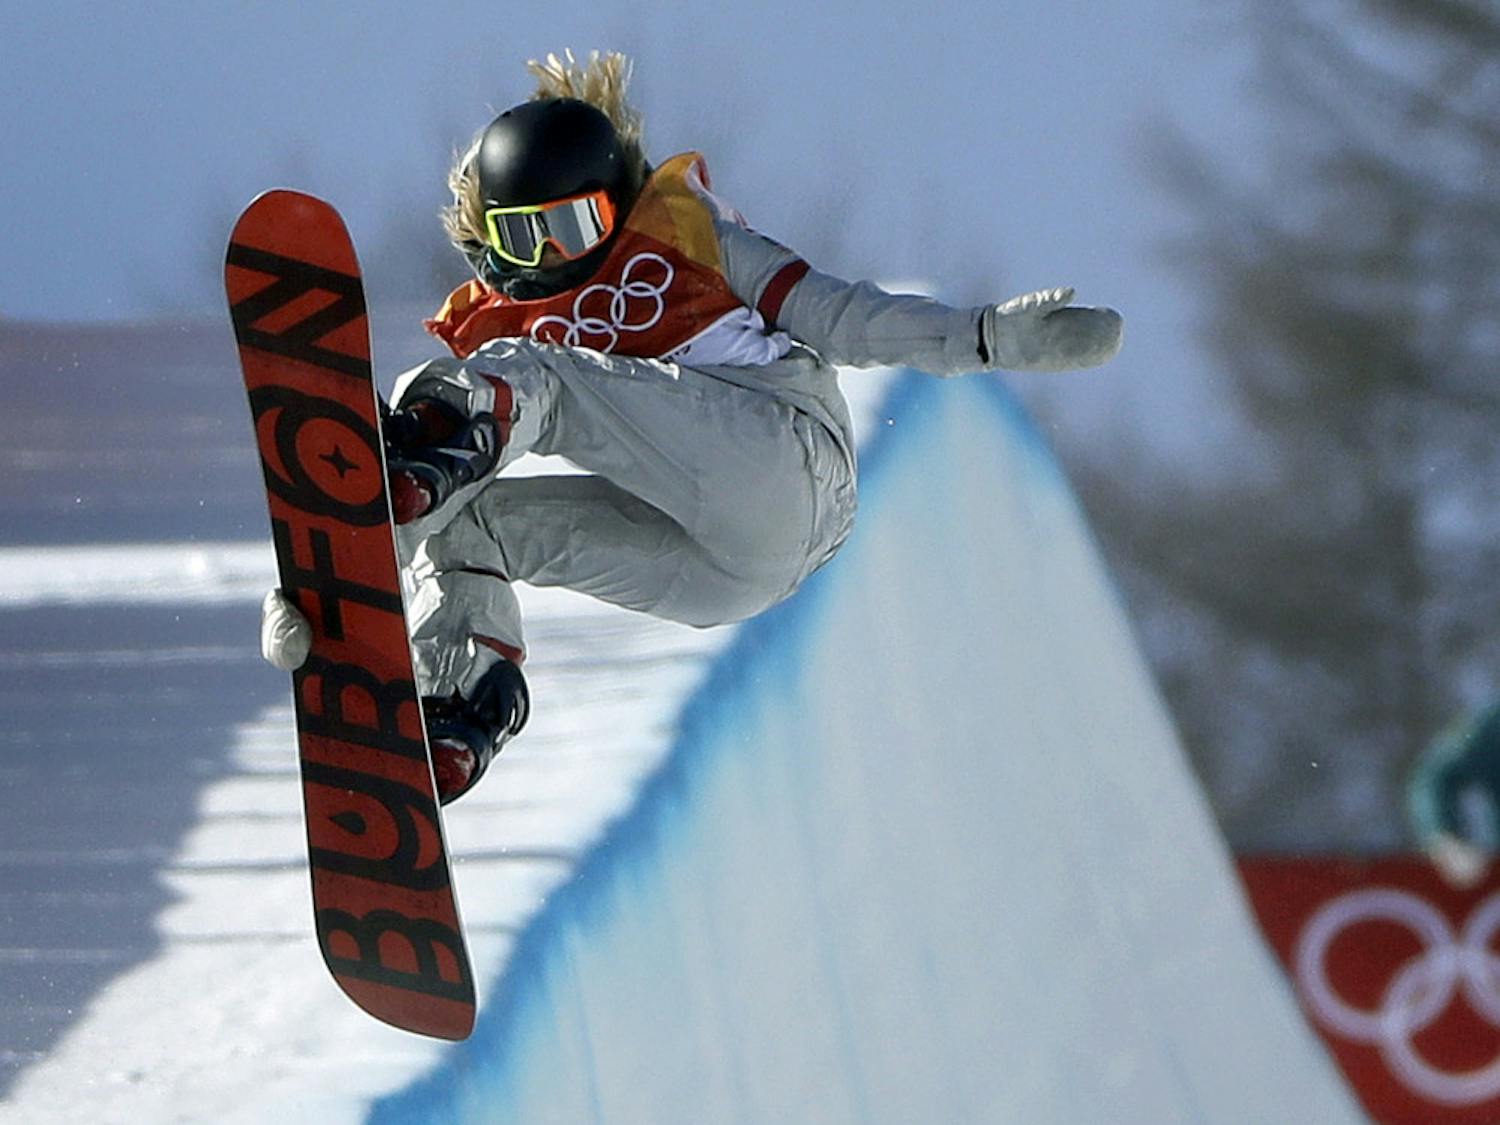 California native Chloe Kim won gold in the women's halfpipe event Tuesday at the 2018 Winter Olympics in Pyeongchang, South Korea. 